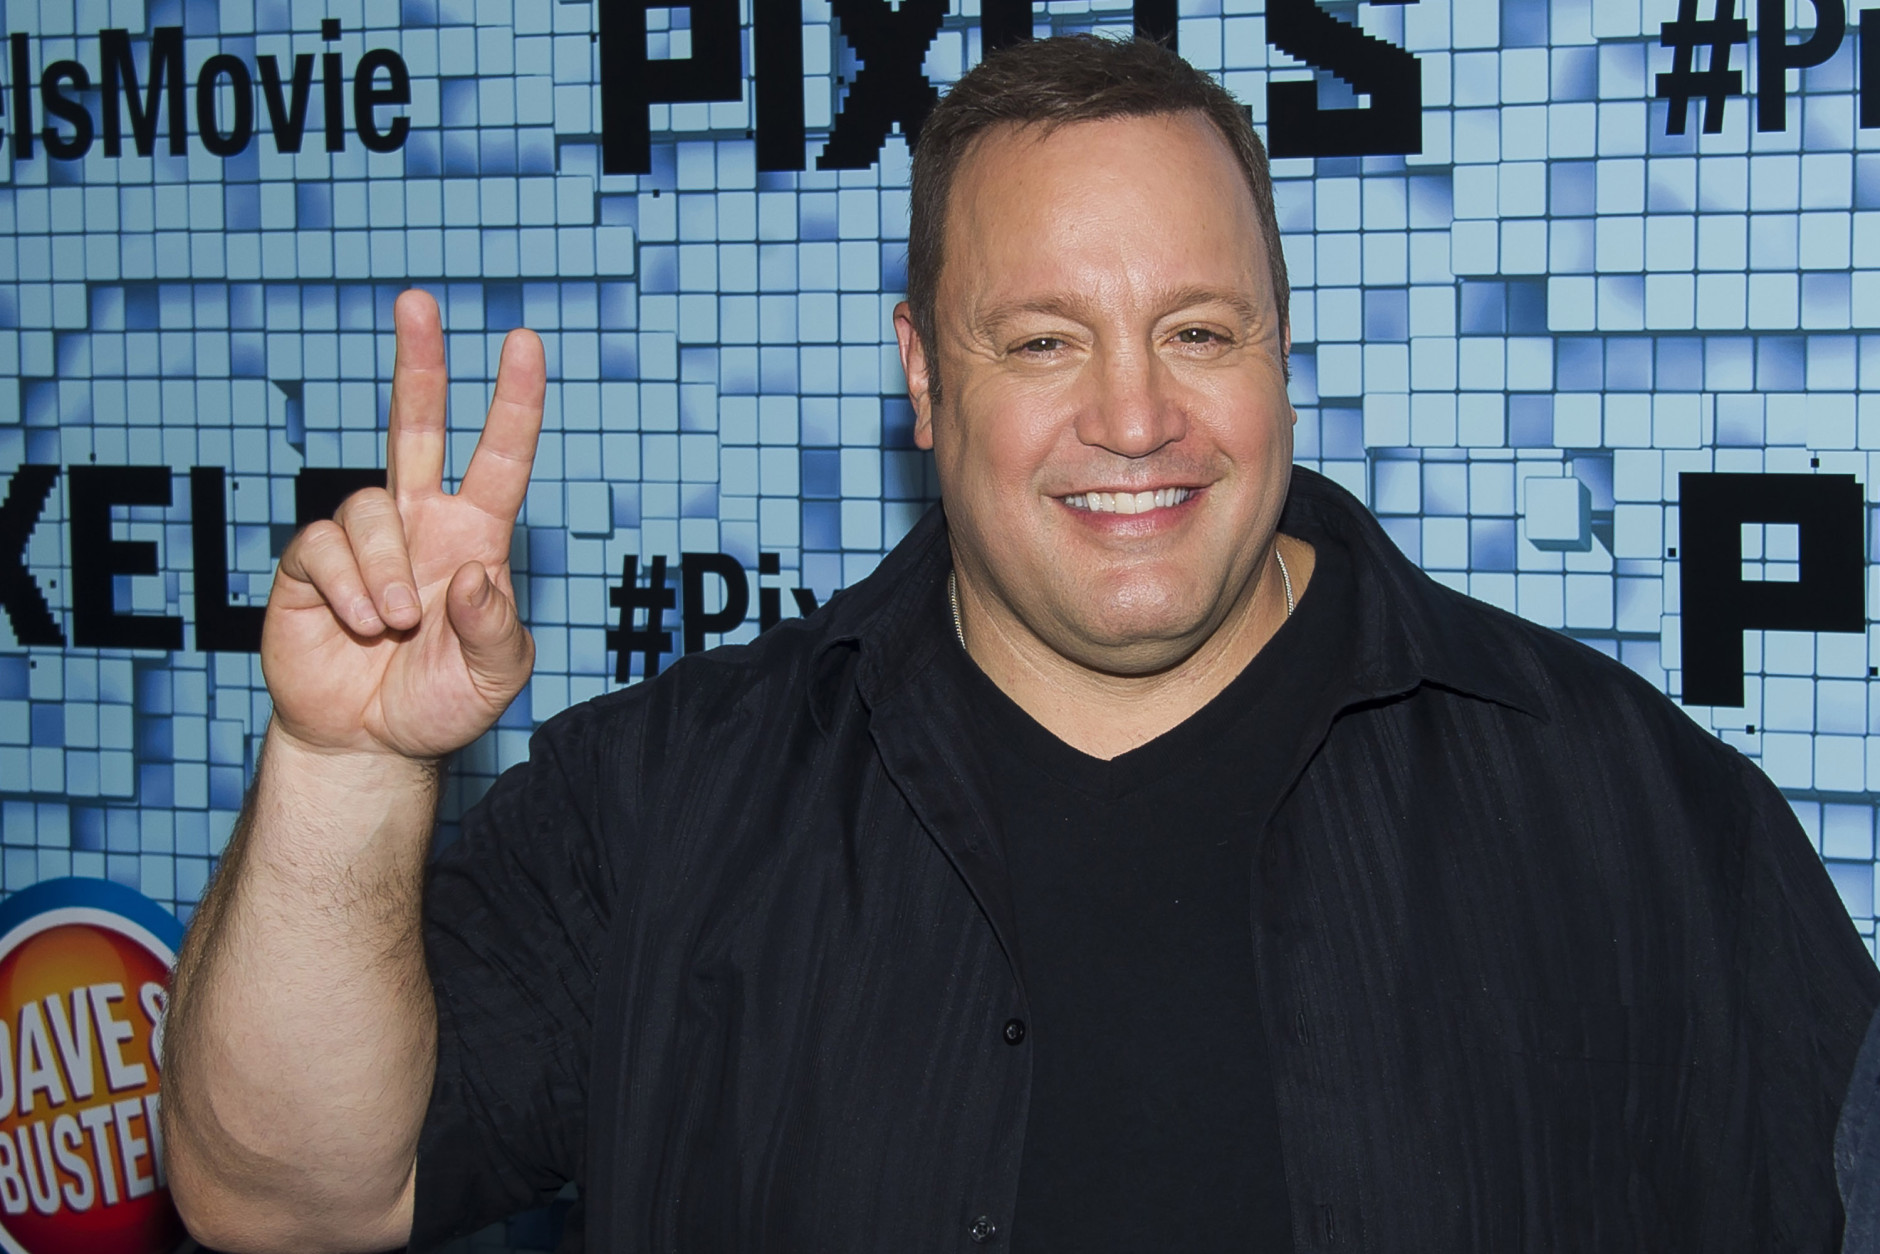 Kevin James attends the world premiere of "Pixels" at Regal E-Walk on Saturday, July 18, 2015, in New York. (Photo by Charles Sykes/Invision/AP)